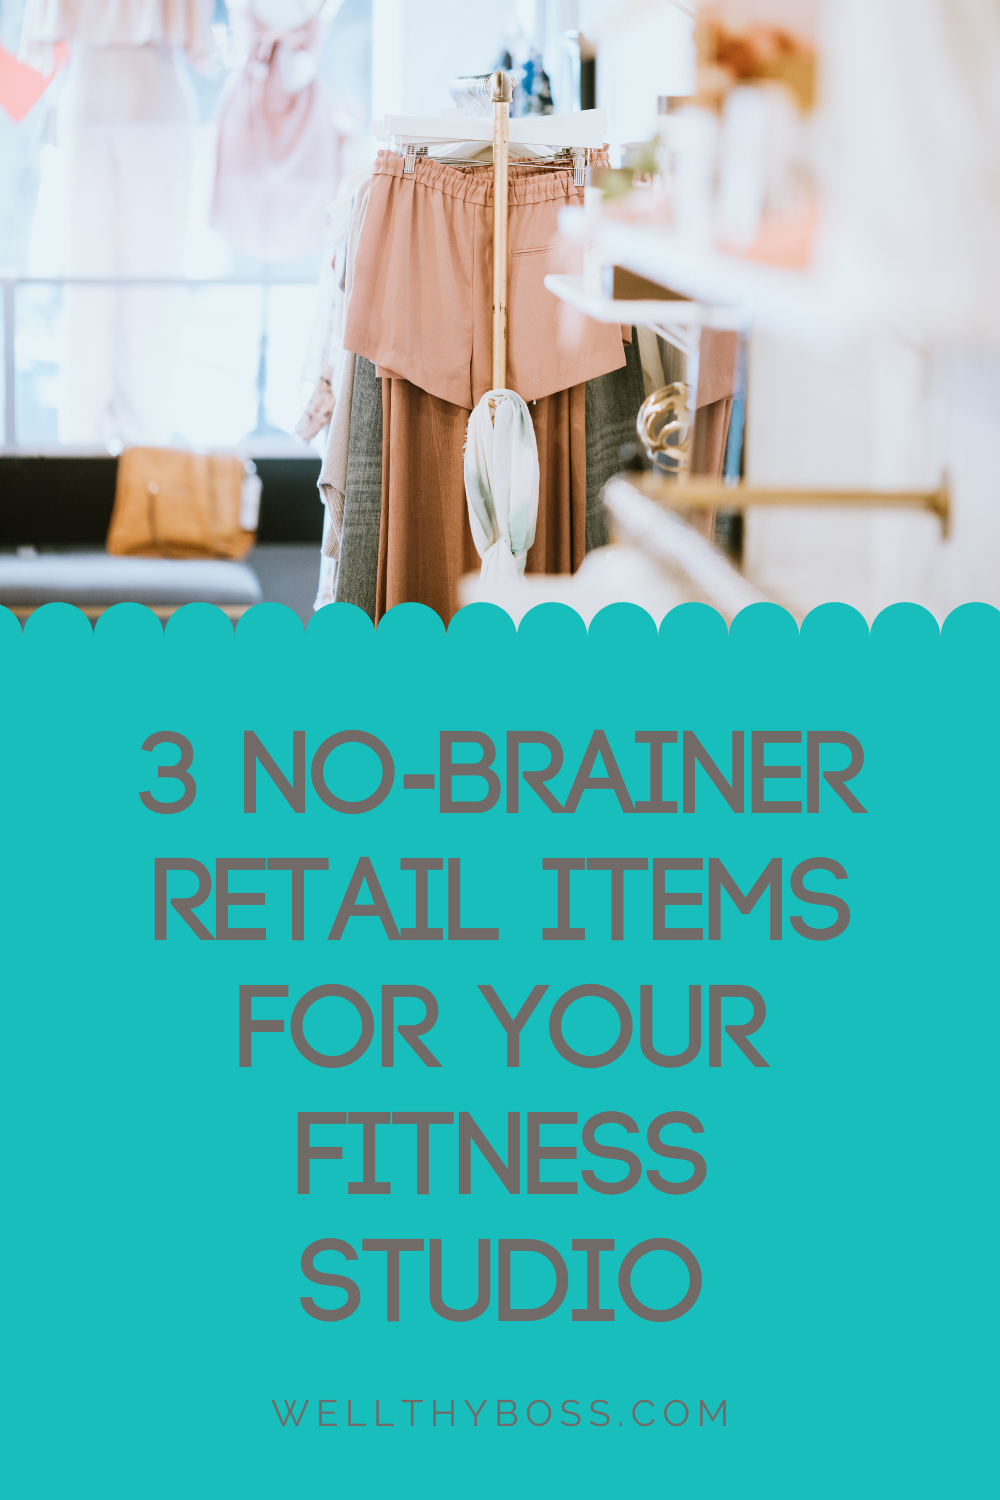 3 no-brainer retail items for your fitness studio